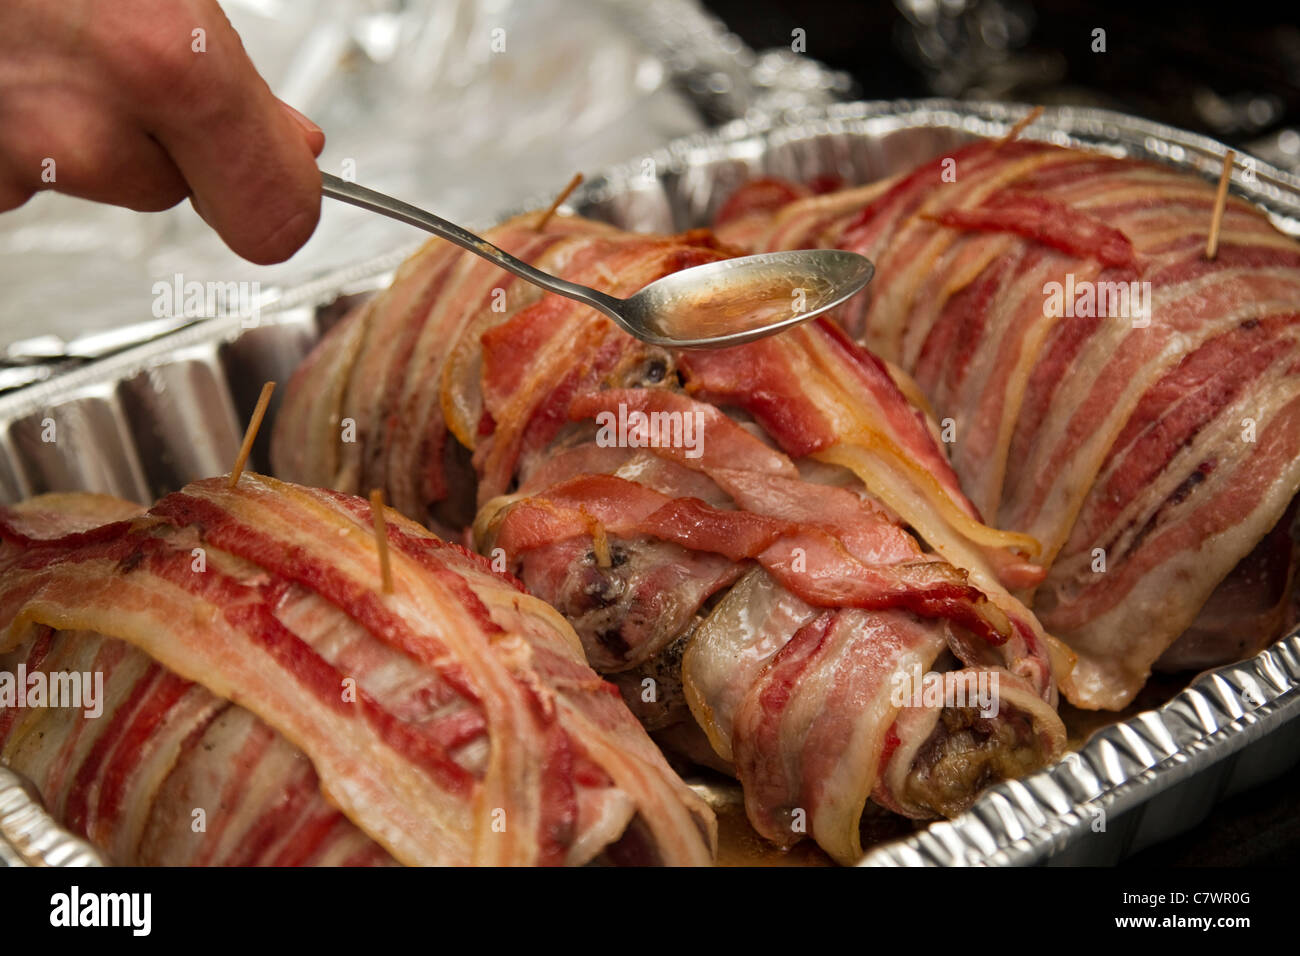 Bacon turkey basting while baking in oven, gourmet food Stock Photo